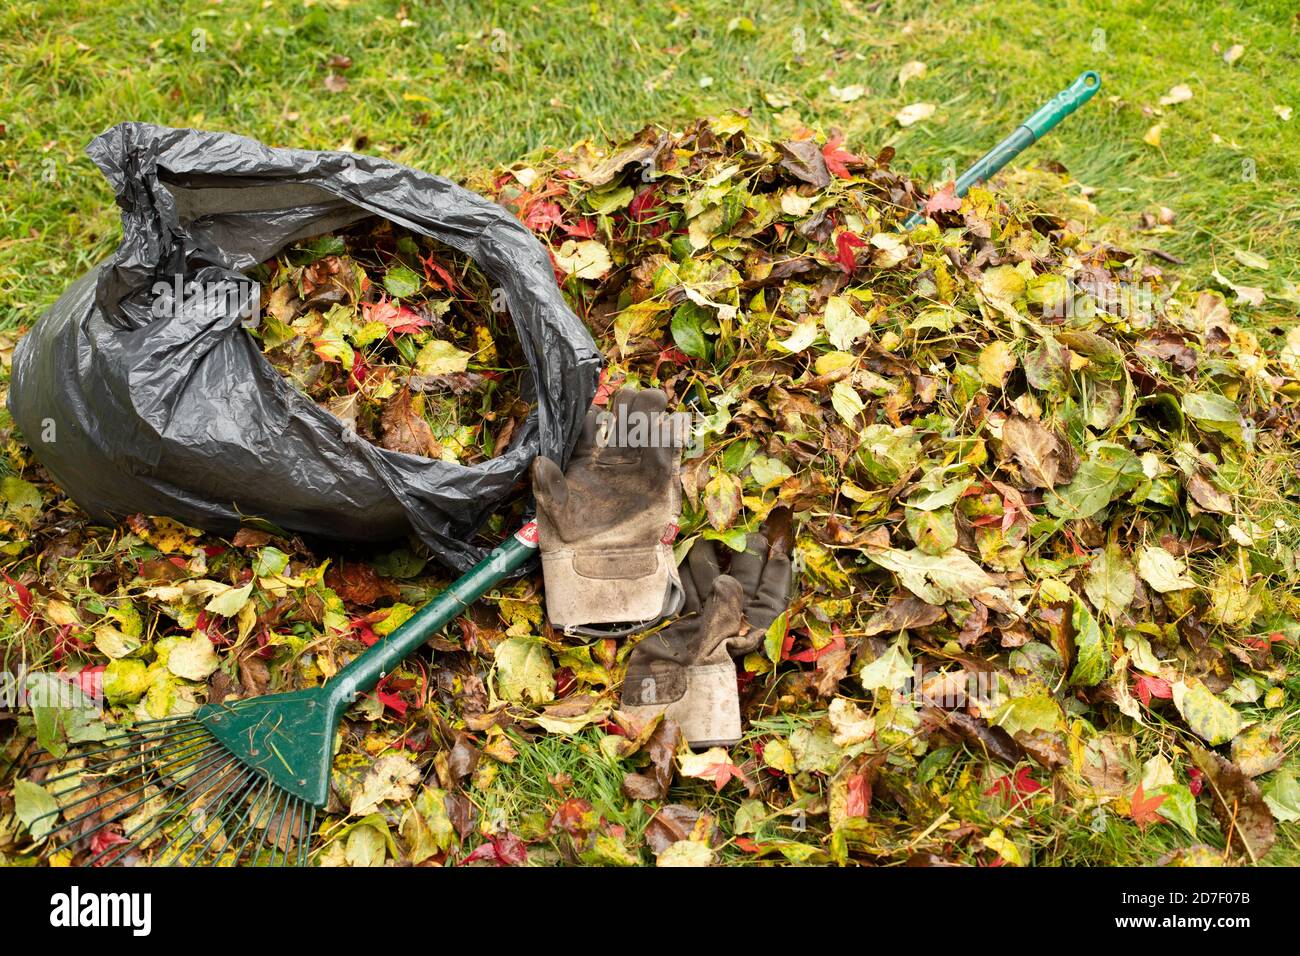 A pile of fallen leaves being transferred into a black plastic bag to turn into leaf mould. Stock Photo